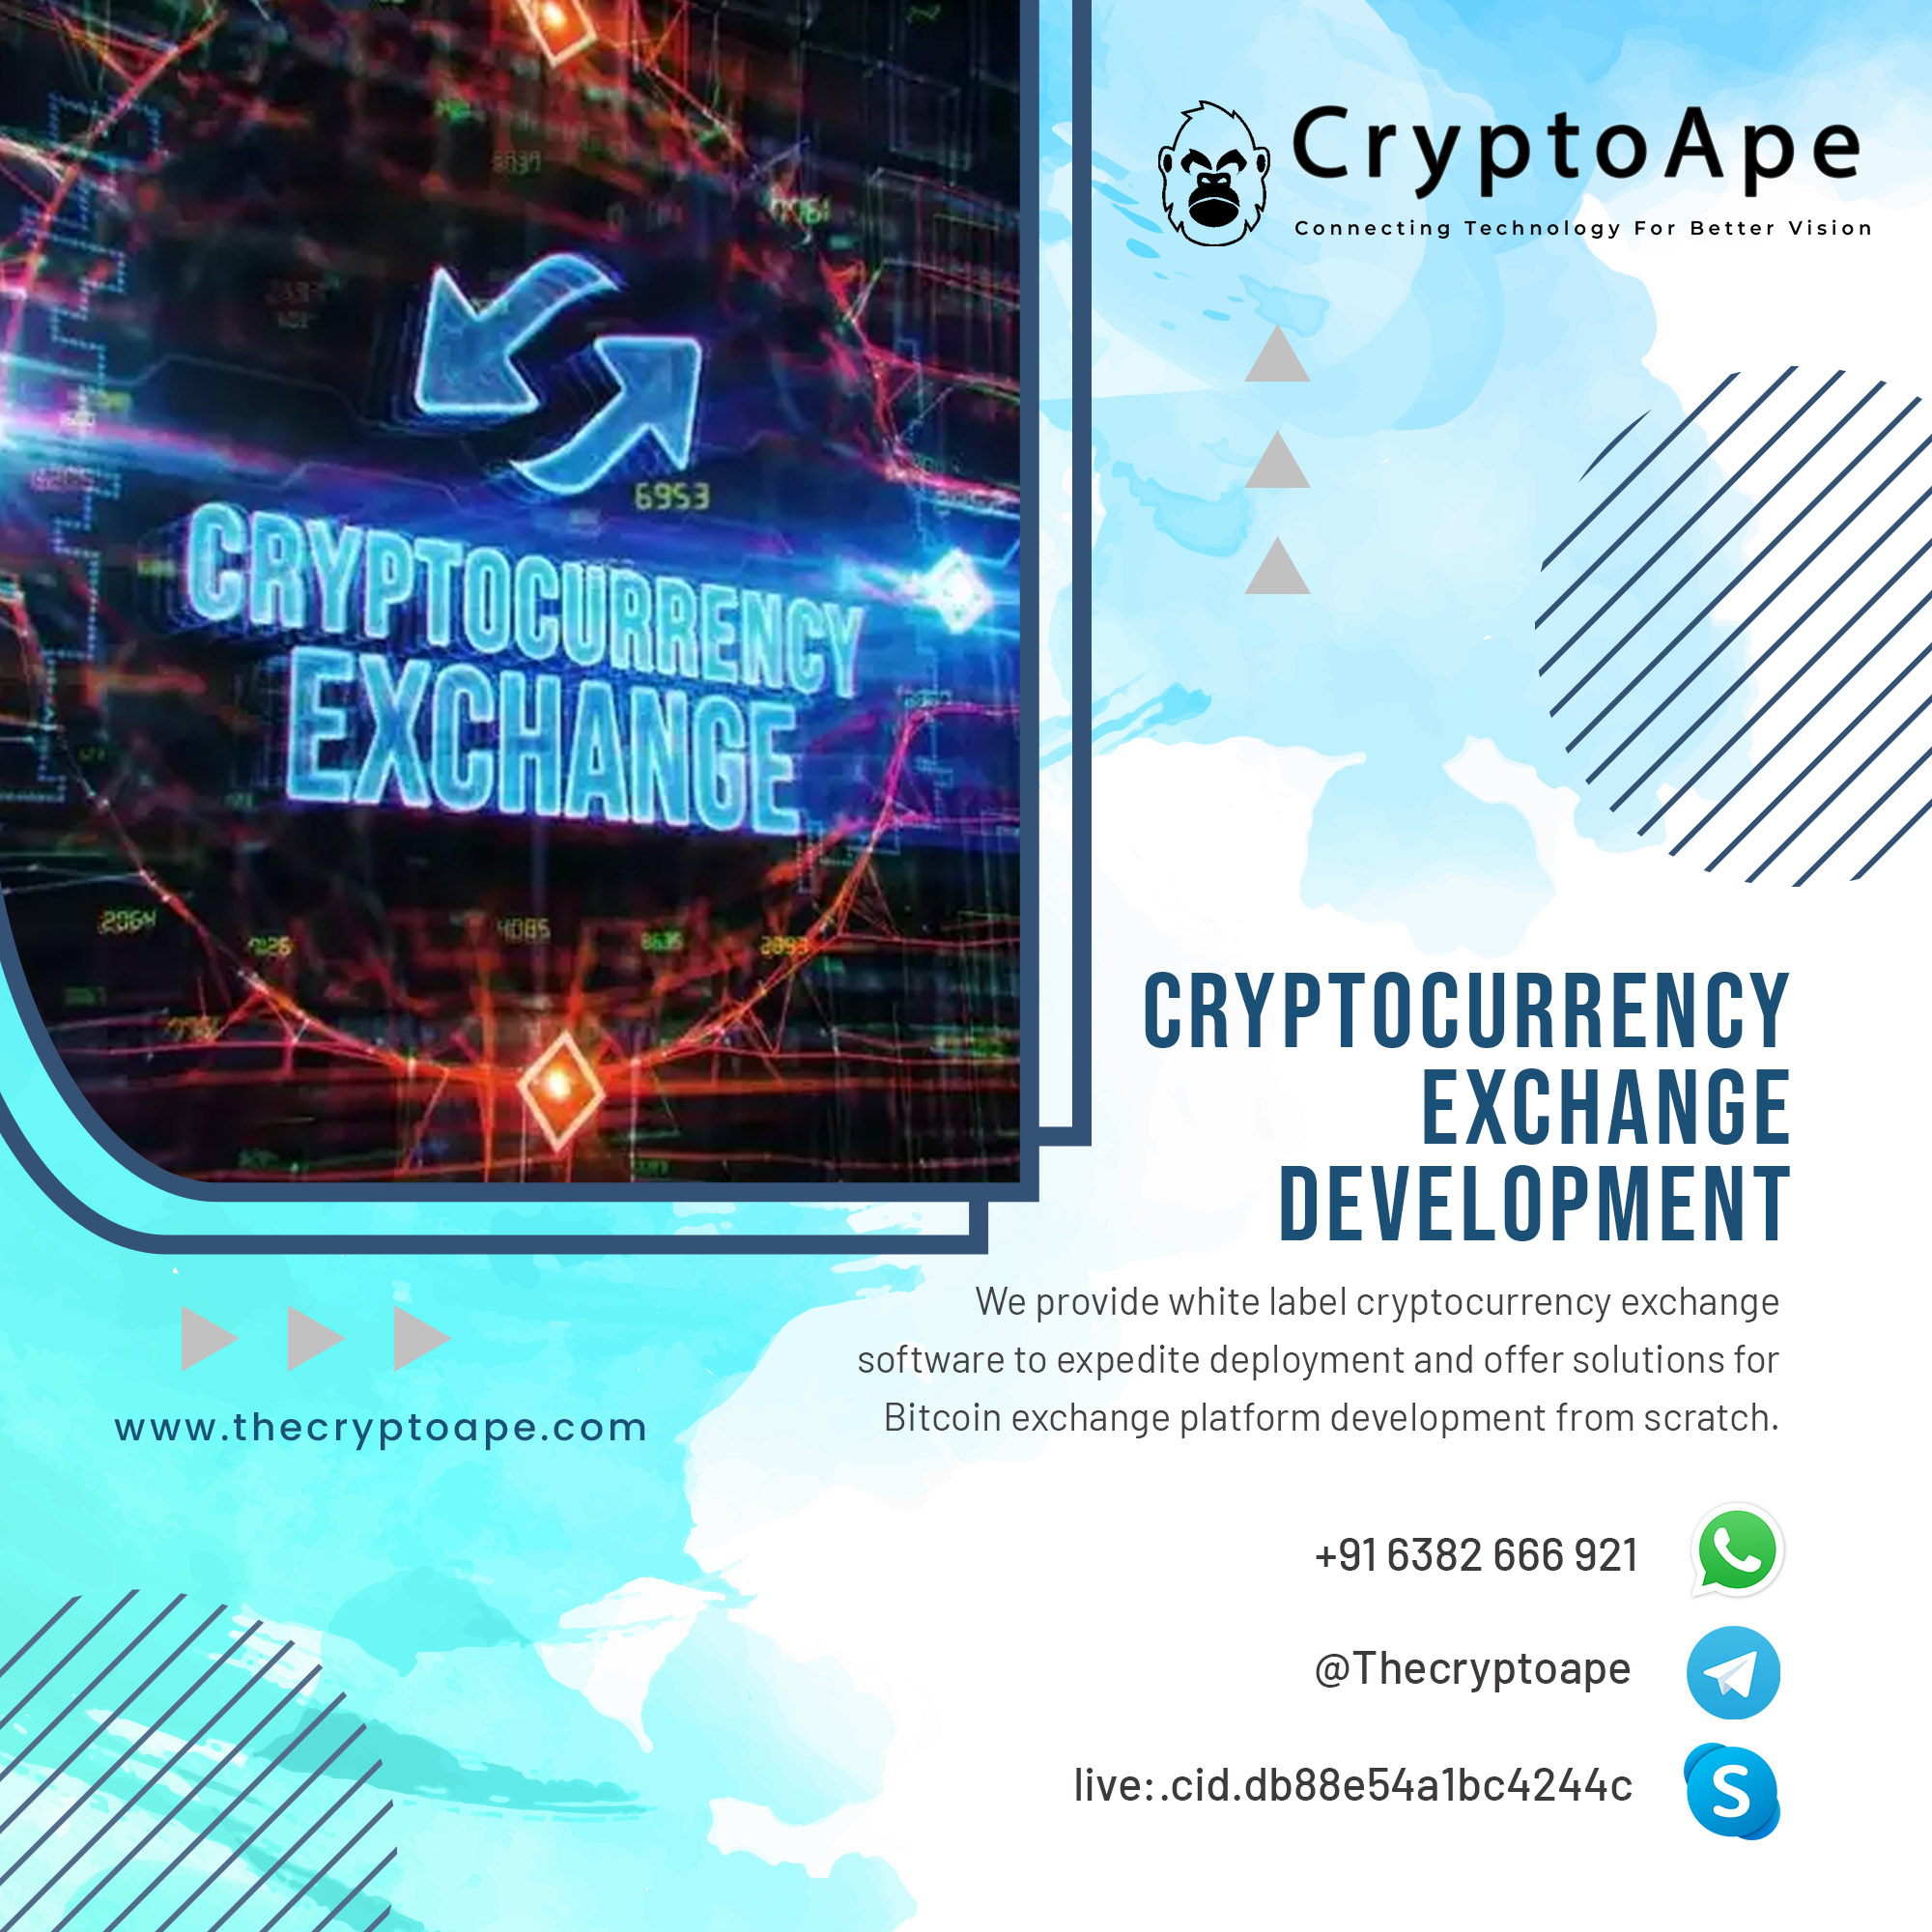 www.thecryptoape.com

N

CRYPTOCURRENCY
EXCHANGE
DEVELOPMENT

We provide white label cryptocurrency exchange
software to expedite deployment and offer solutions for
Bitcoin exchange platform development from scratch.

+916382666 921 {55
@Thecryptoape «

live:.cid.db88eb54albc4244c S